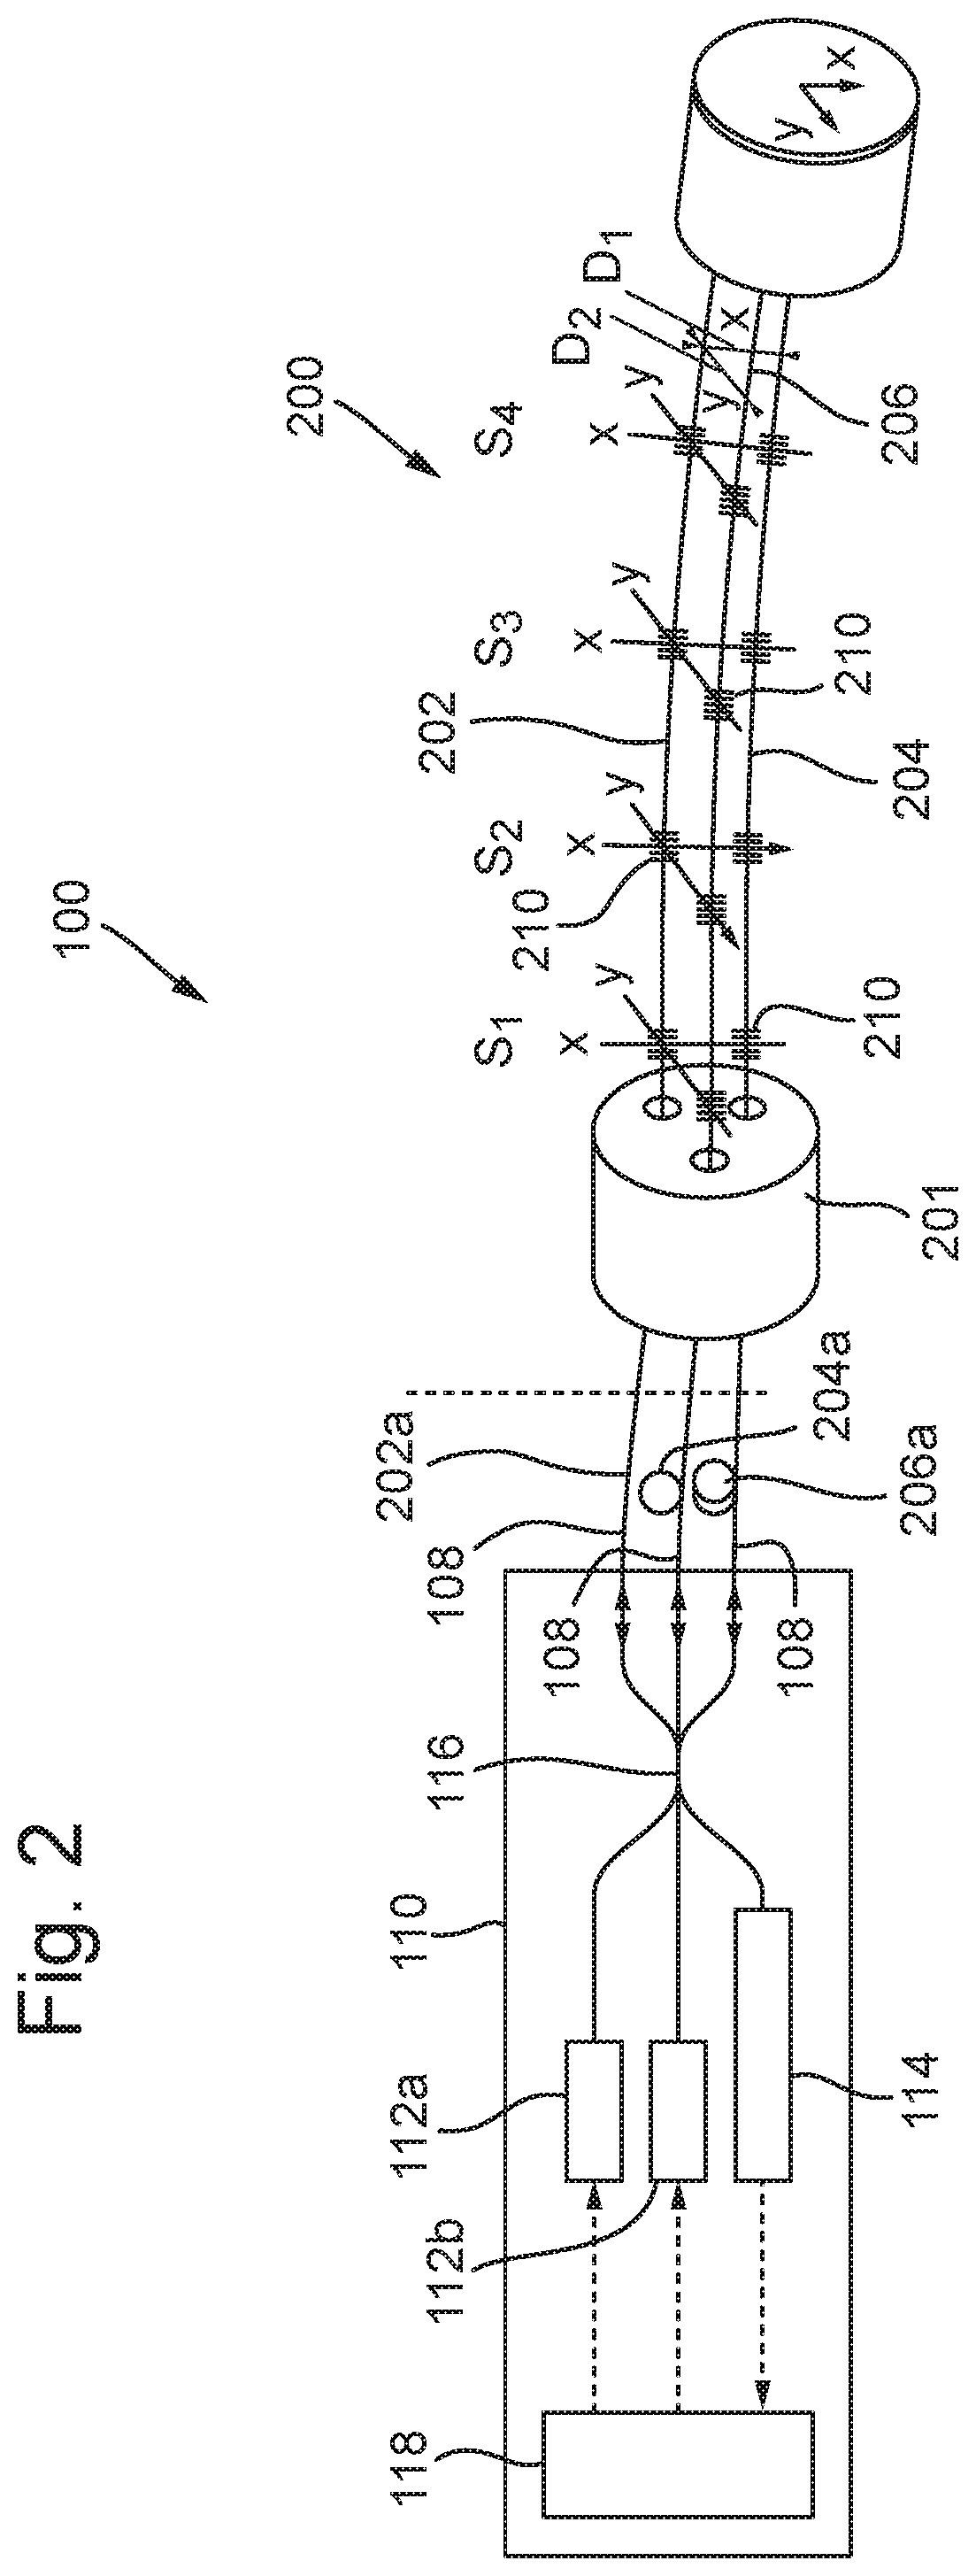 An optical shape sensing method and system